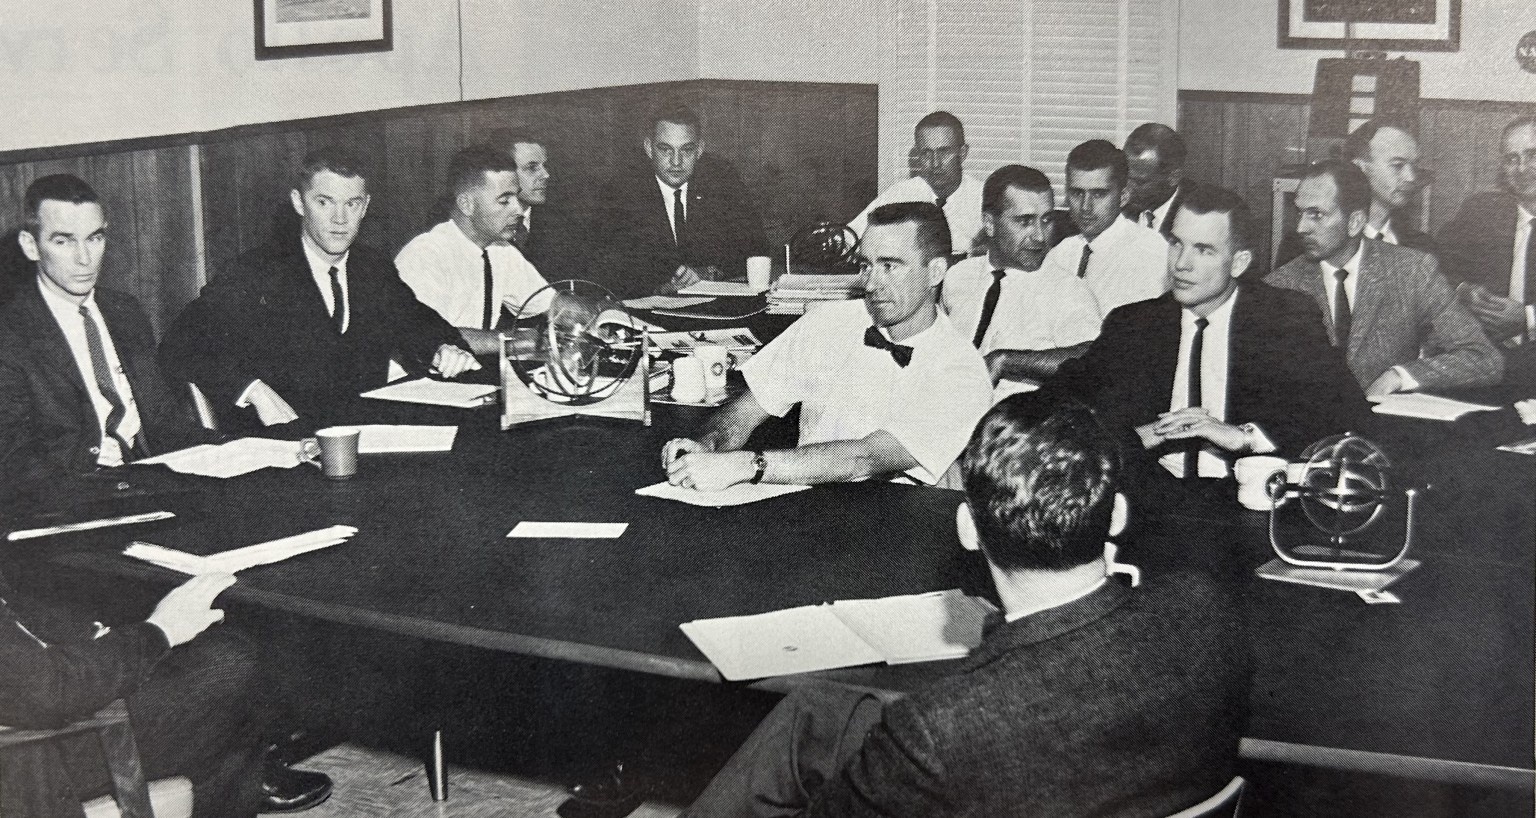 group-3-2-first-day-of-work-feb-3-1964-img-0885